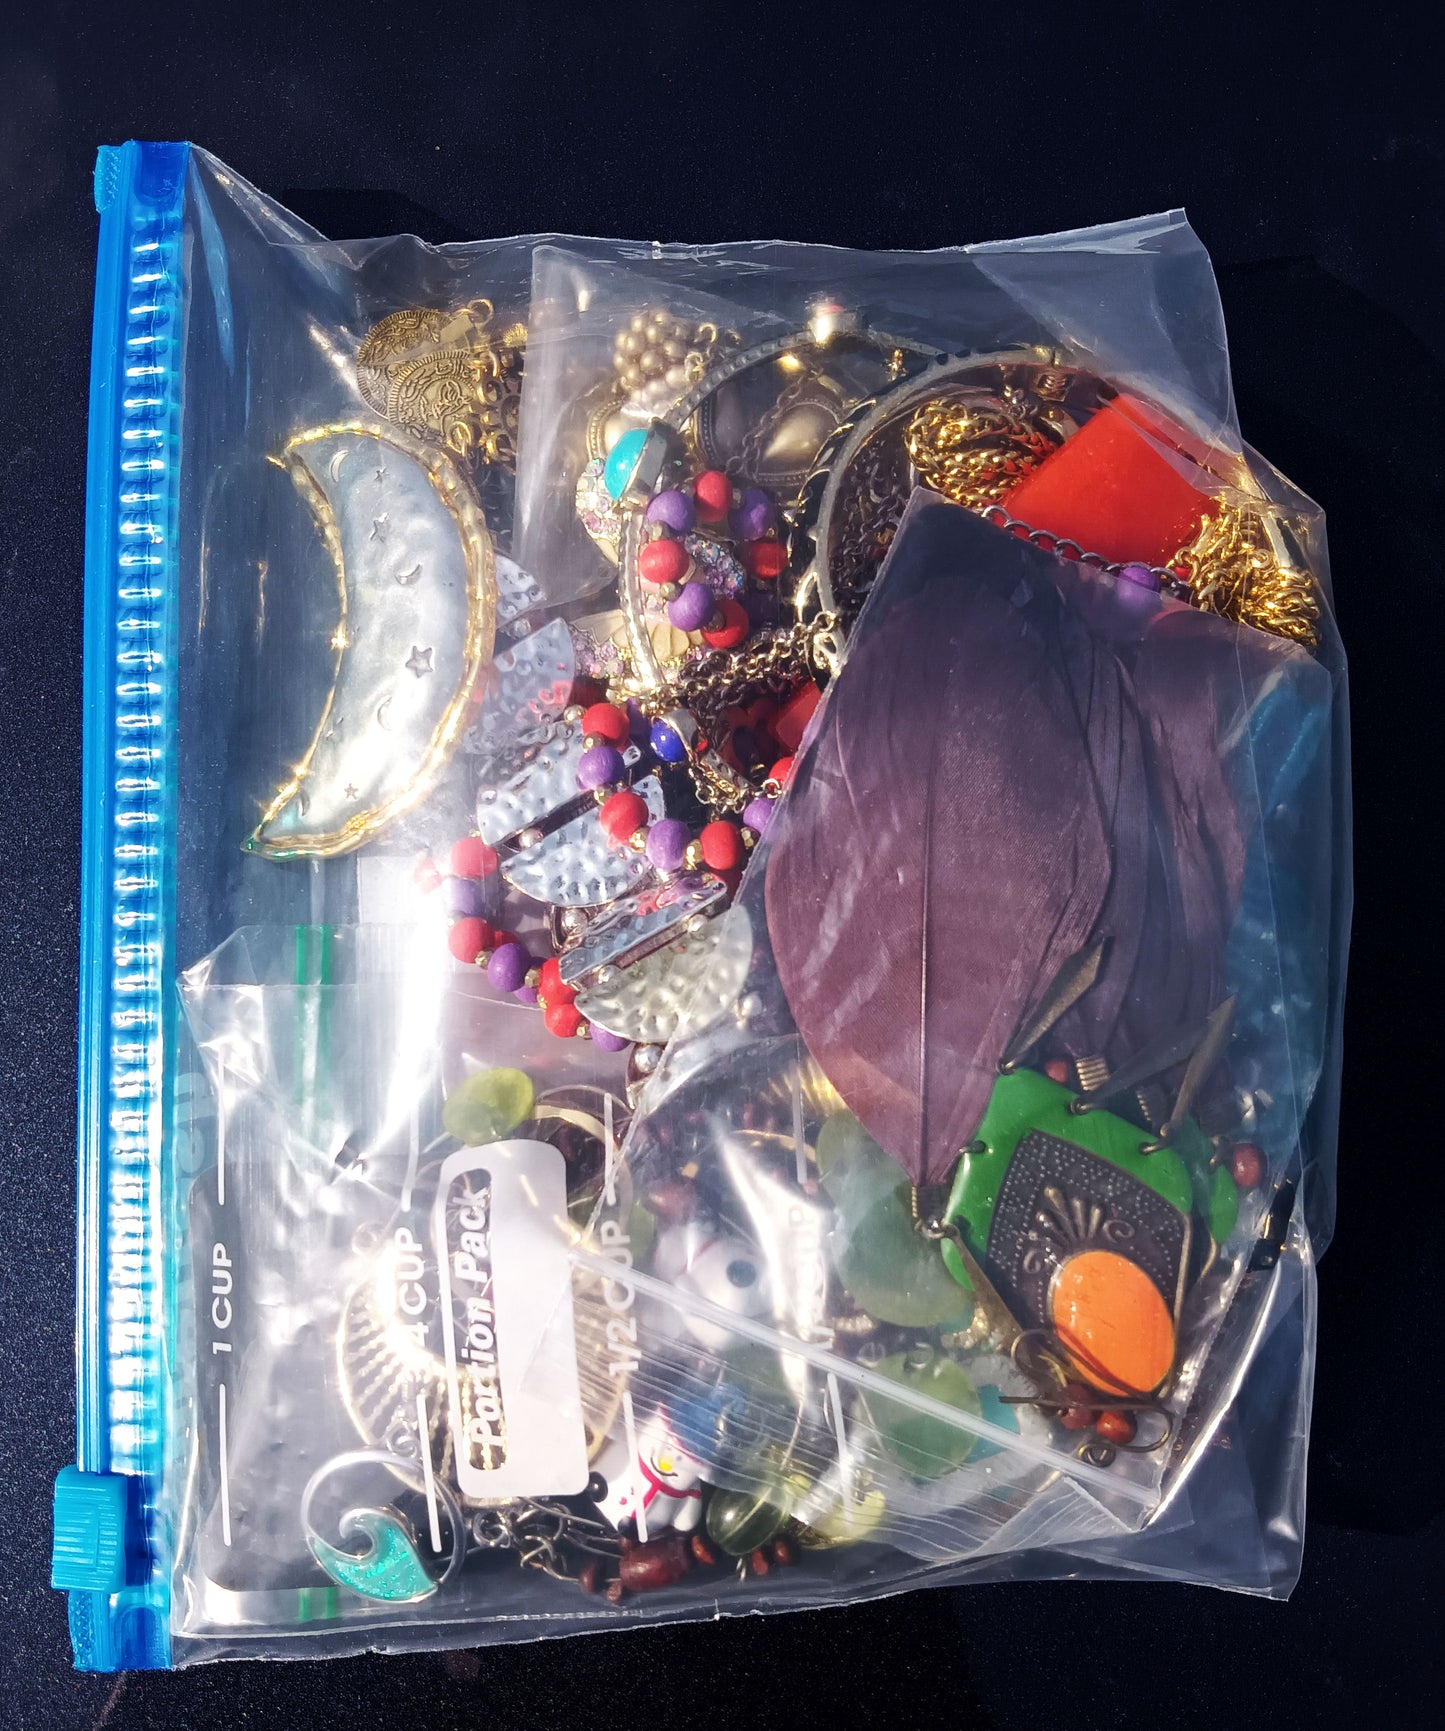 Mystery Mixed Costume Jewelry Bag - 1 Pound - No. 25